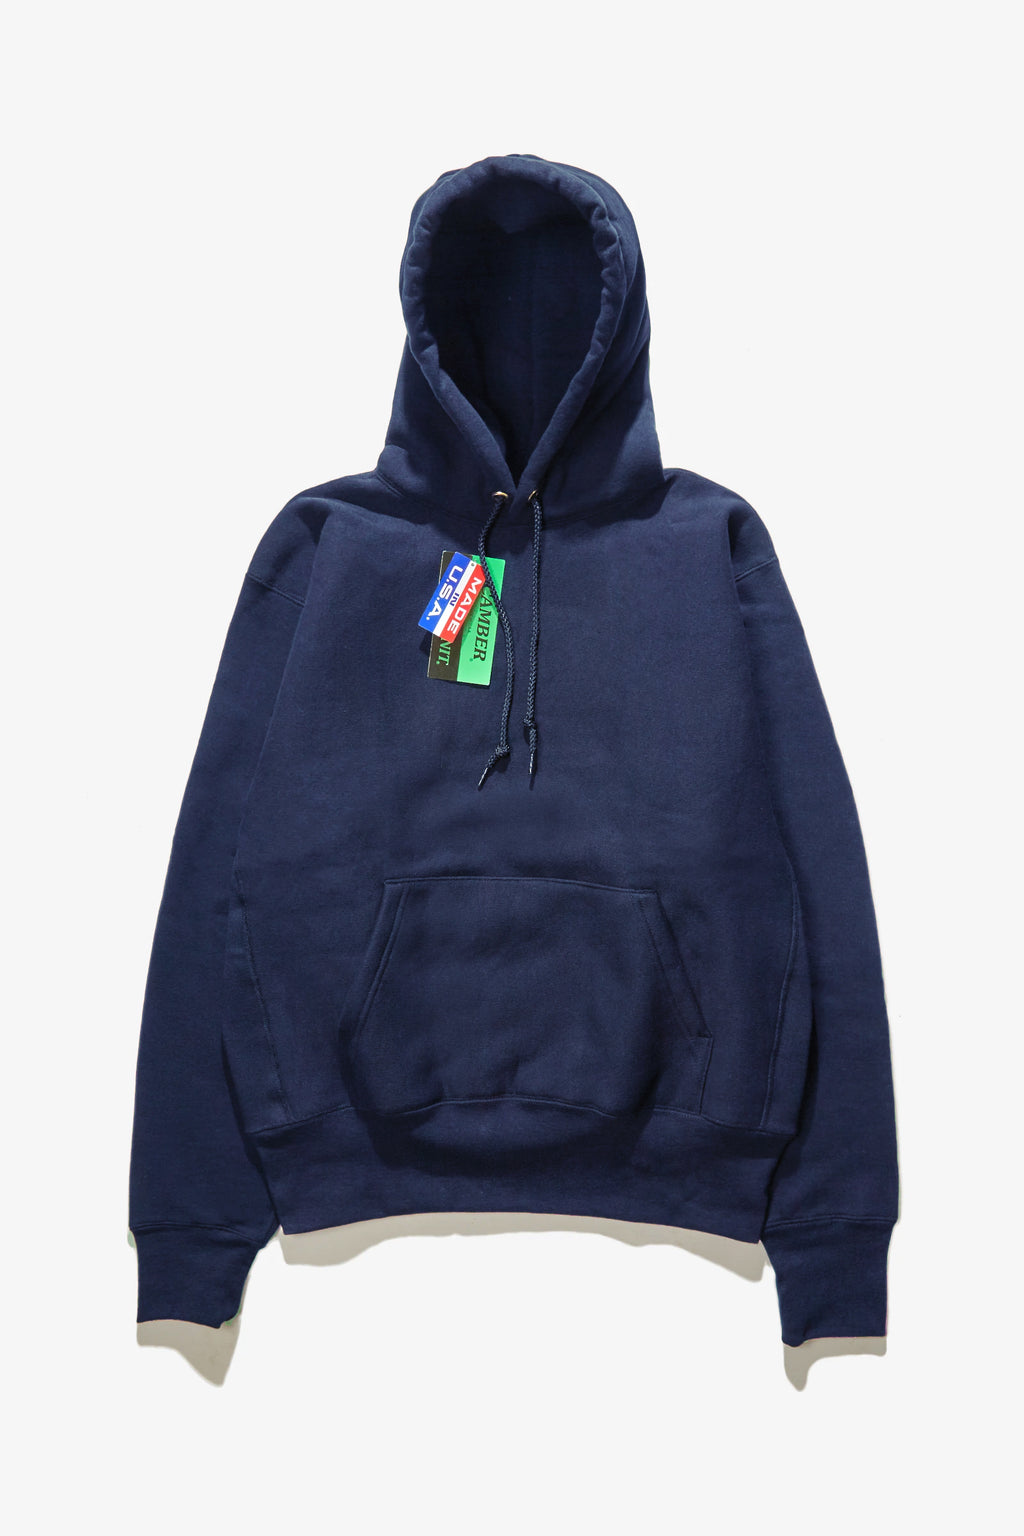 Camber USA - 232 12oz Pullover Hoodie - Navy